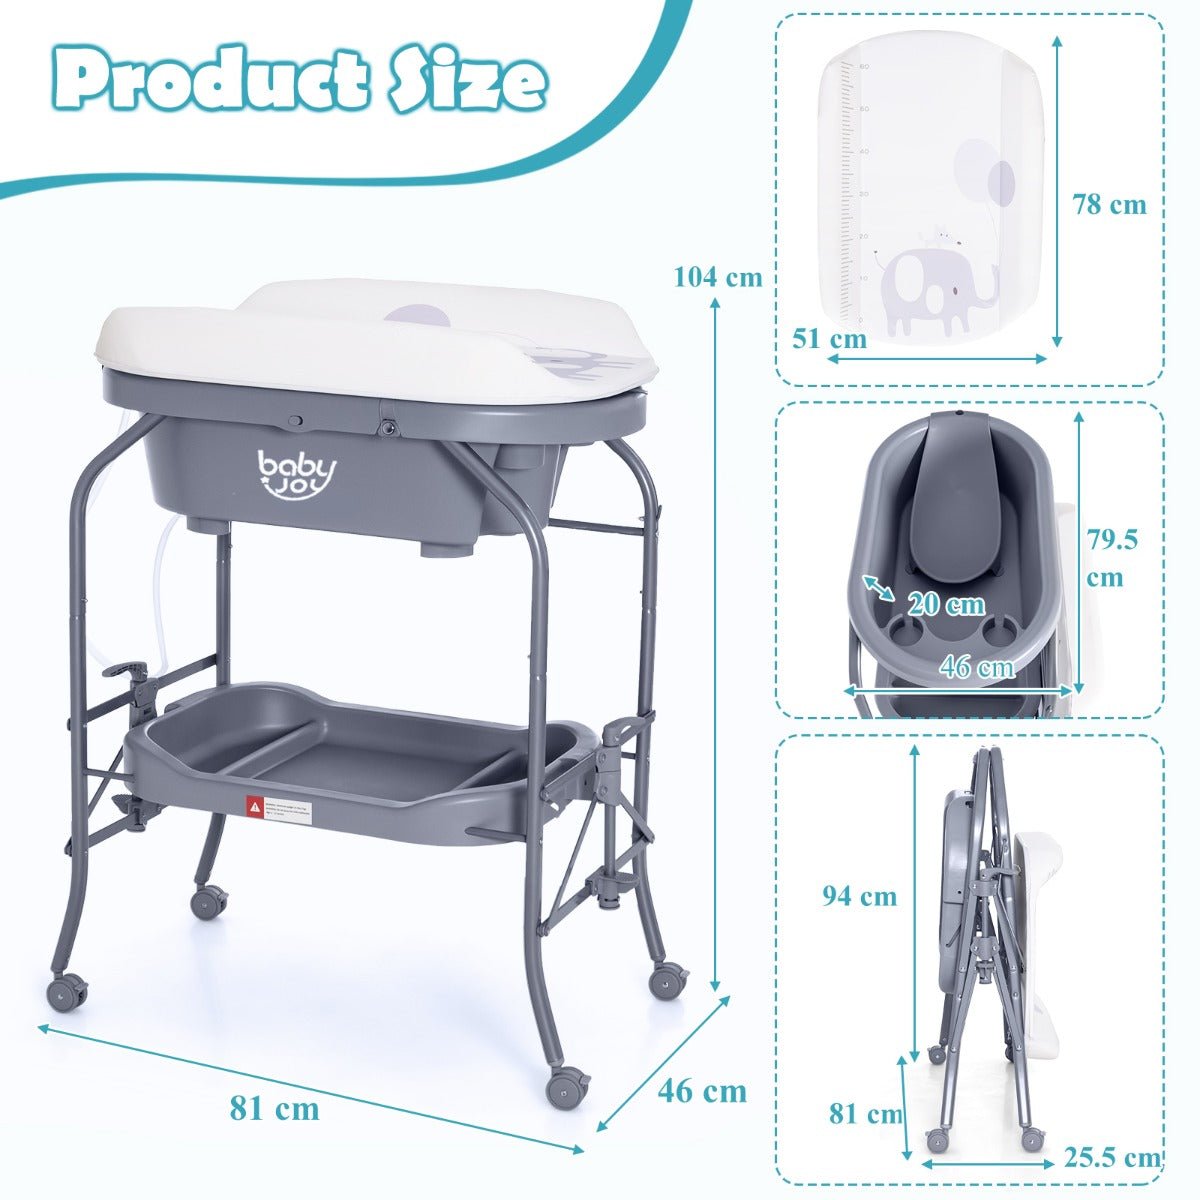 2 in 1 Baby Changing Table - Quality Baby Care at Kids Mega Mart